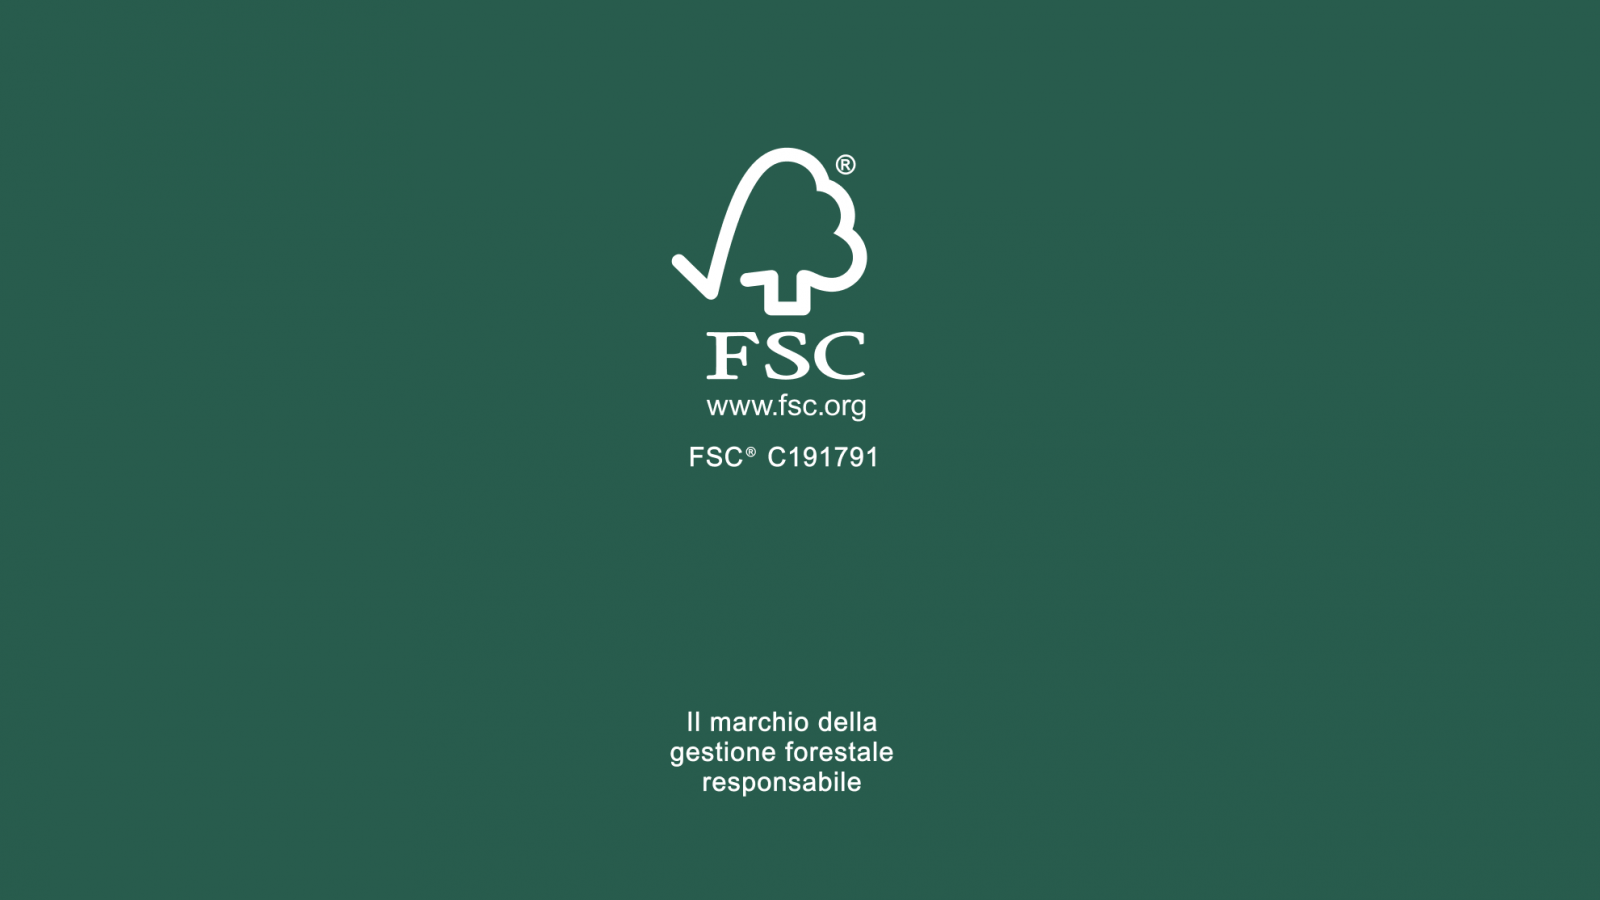 An increasingly green future with FSC®certification